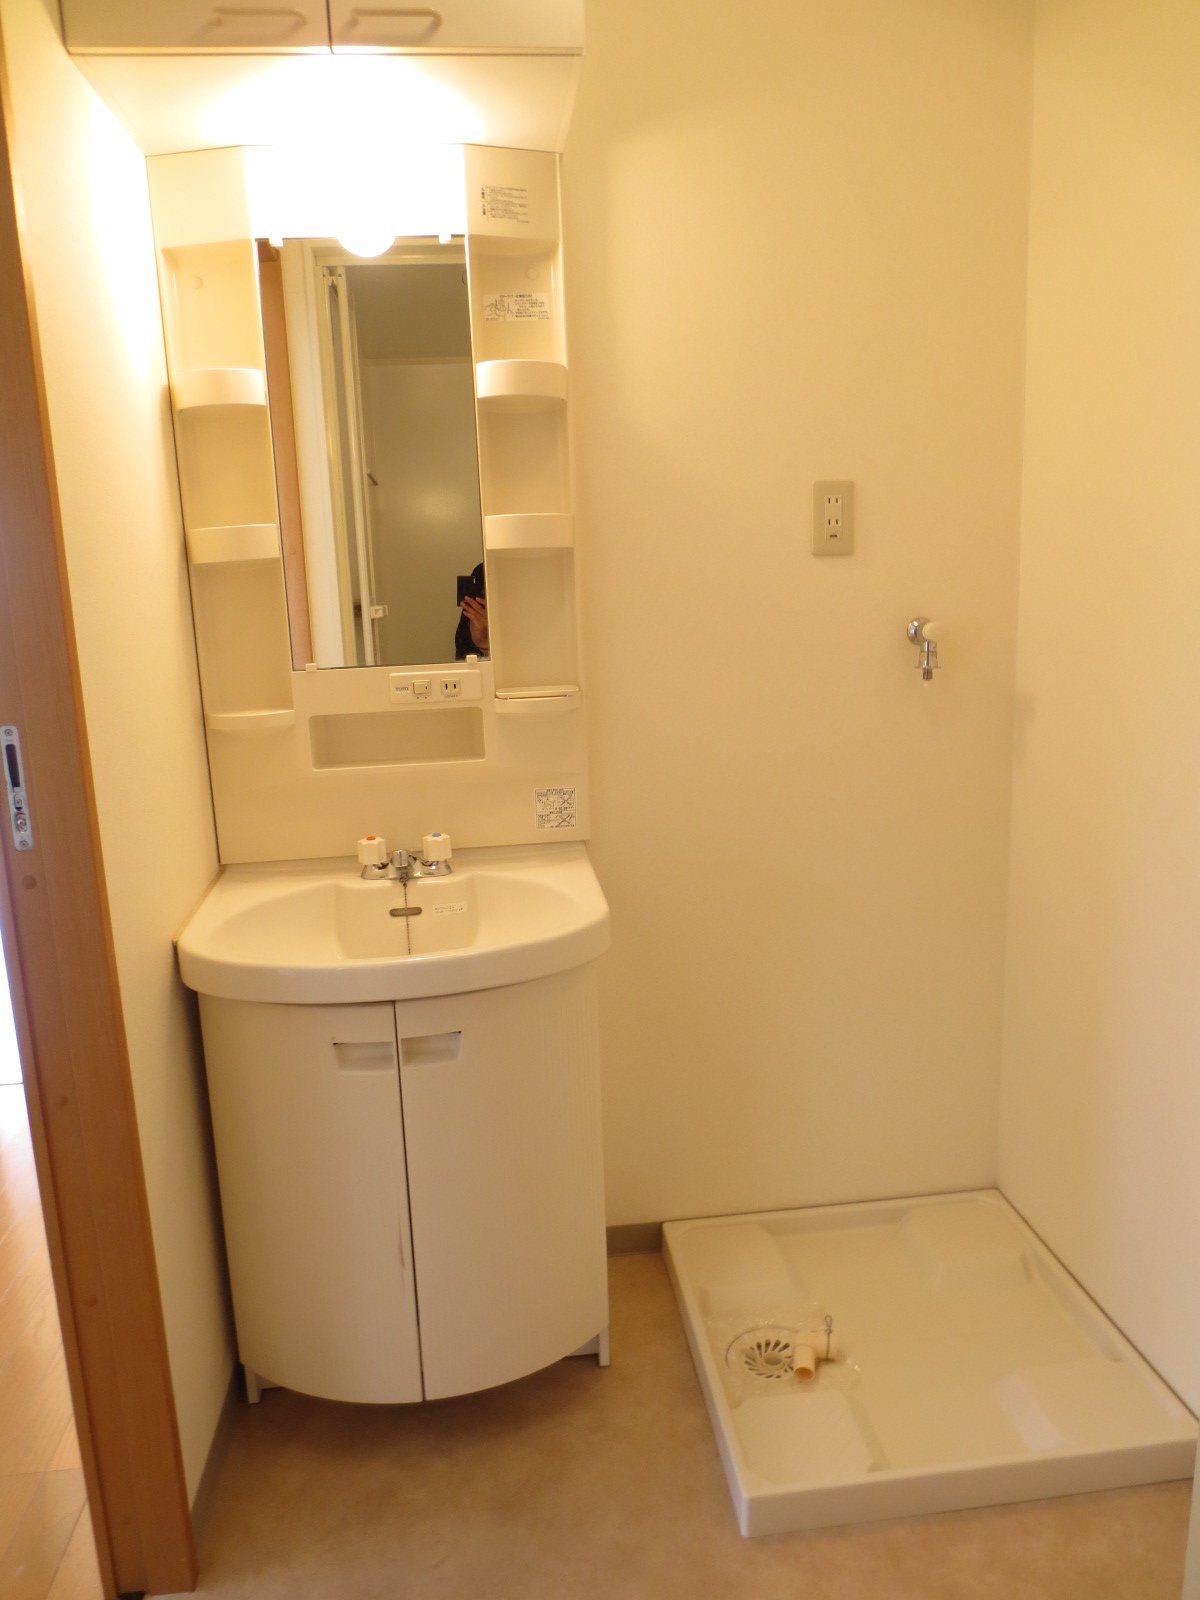 Washroom. Of course, dressing room ・ Washing machine in the room ・ Independent washbasin!